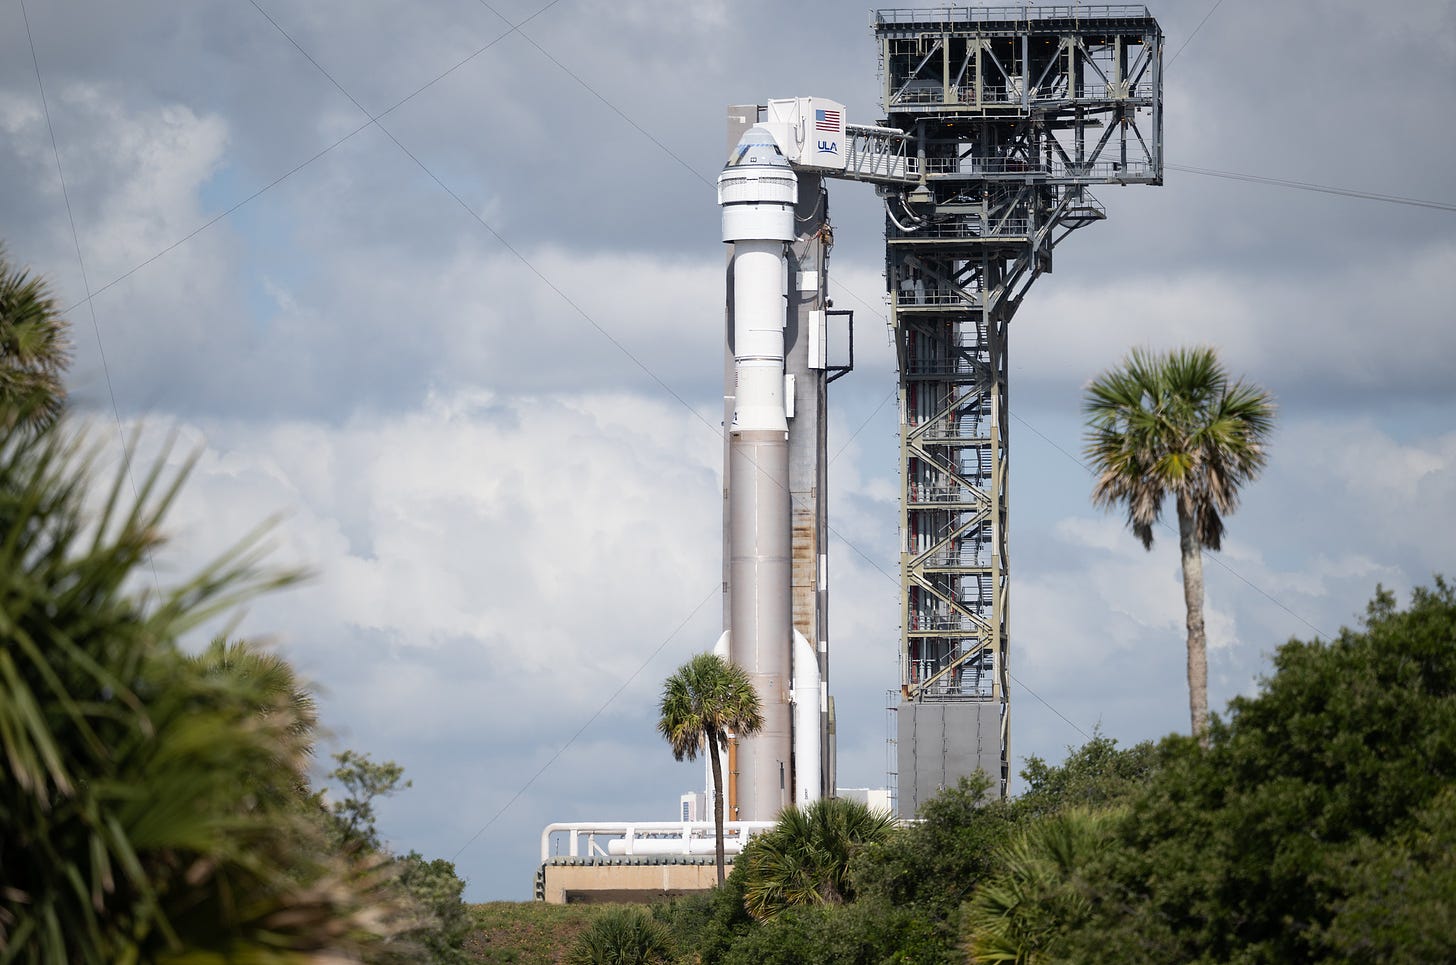 A United Launch Alliance Atlas V rocket with Boeing’s CST-100 Starliner spacecraft aboard is seen on the launch pad at Space Launch Complex 41 ahead of the NASA’s Boeing Crew Flight Test, Monday, May 6, 2024 at Cape Canaveral Space Force Station in Florida. Photo Credit: (NASA/Joel Kowsky)